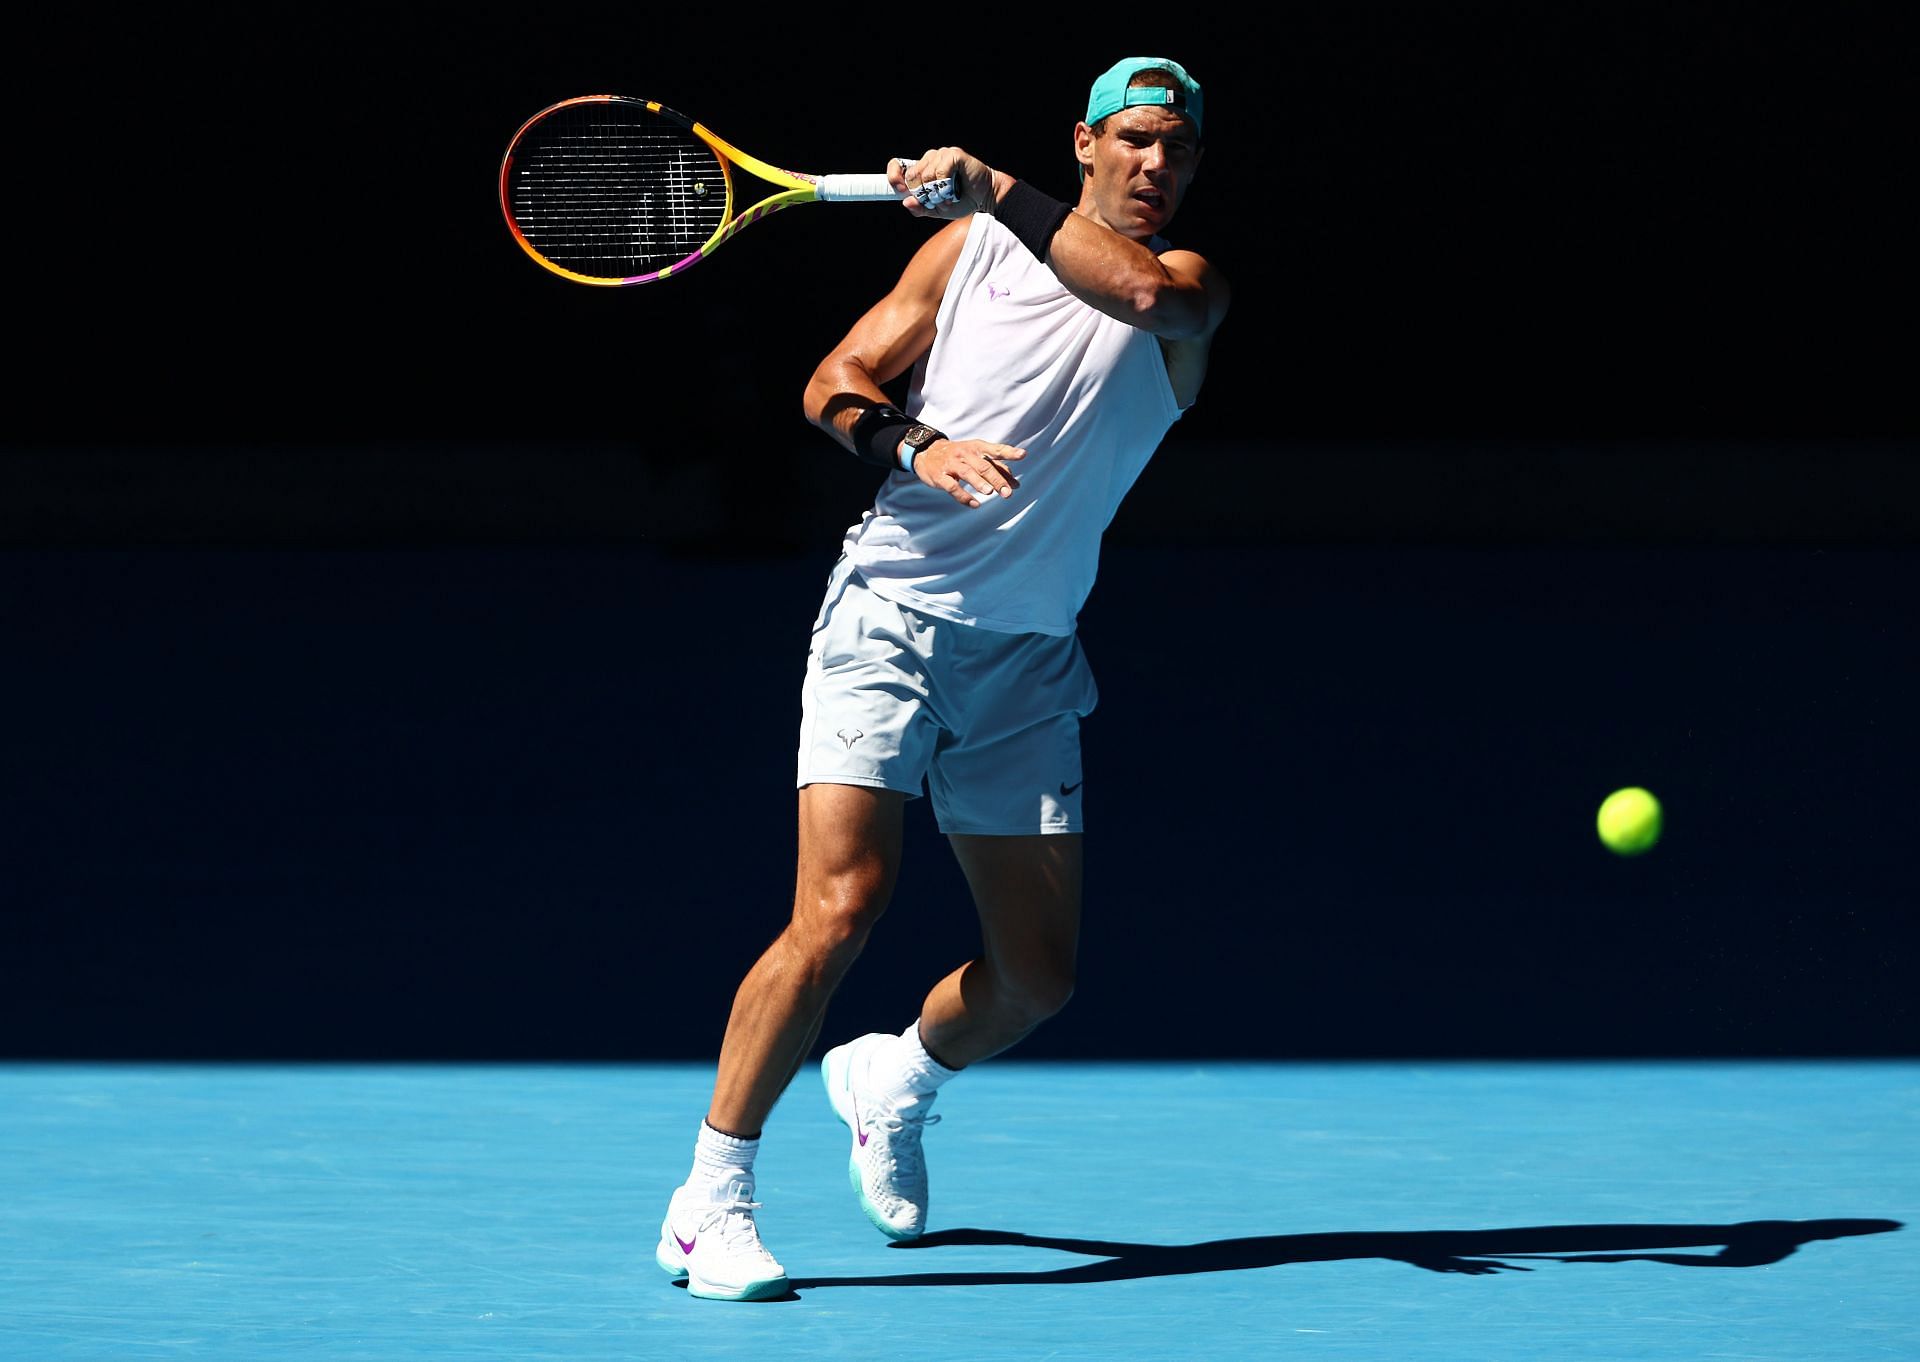 Rafael Nadal will be seen in action on Day 1 of the 2022 Australian Open